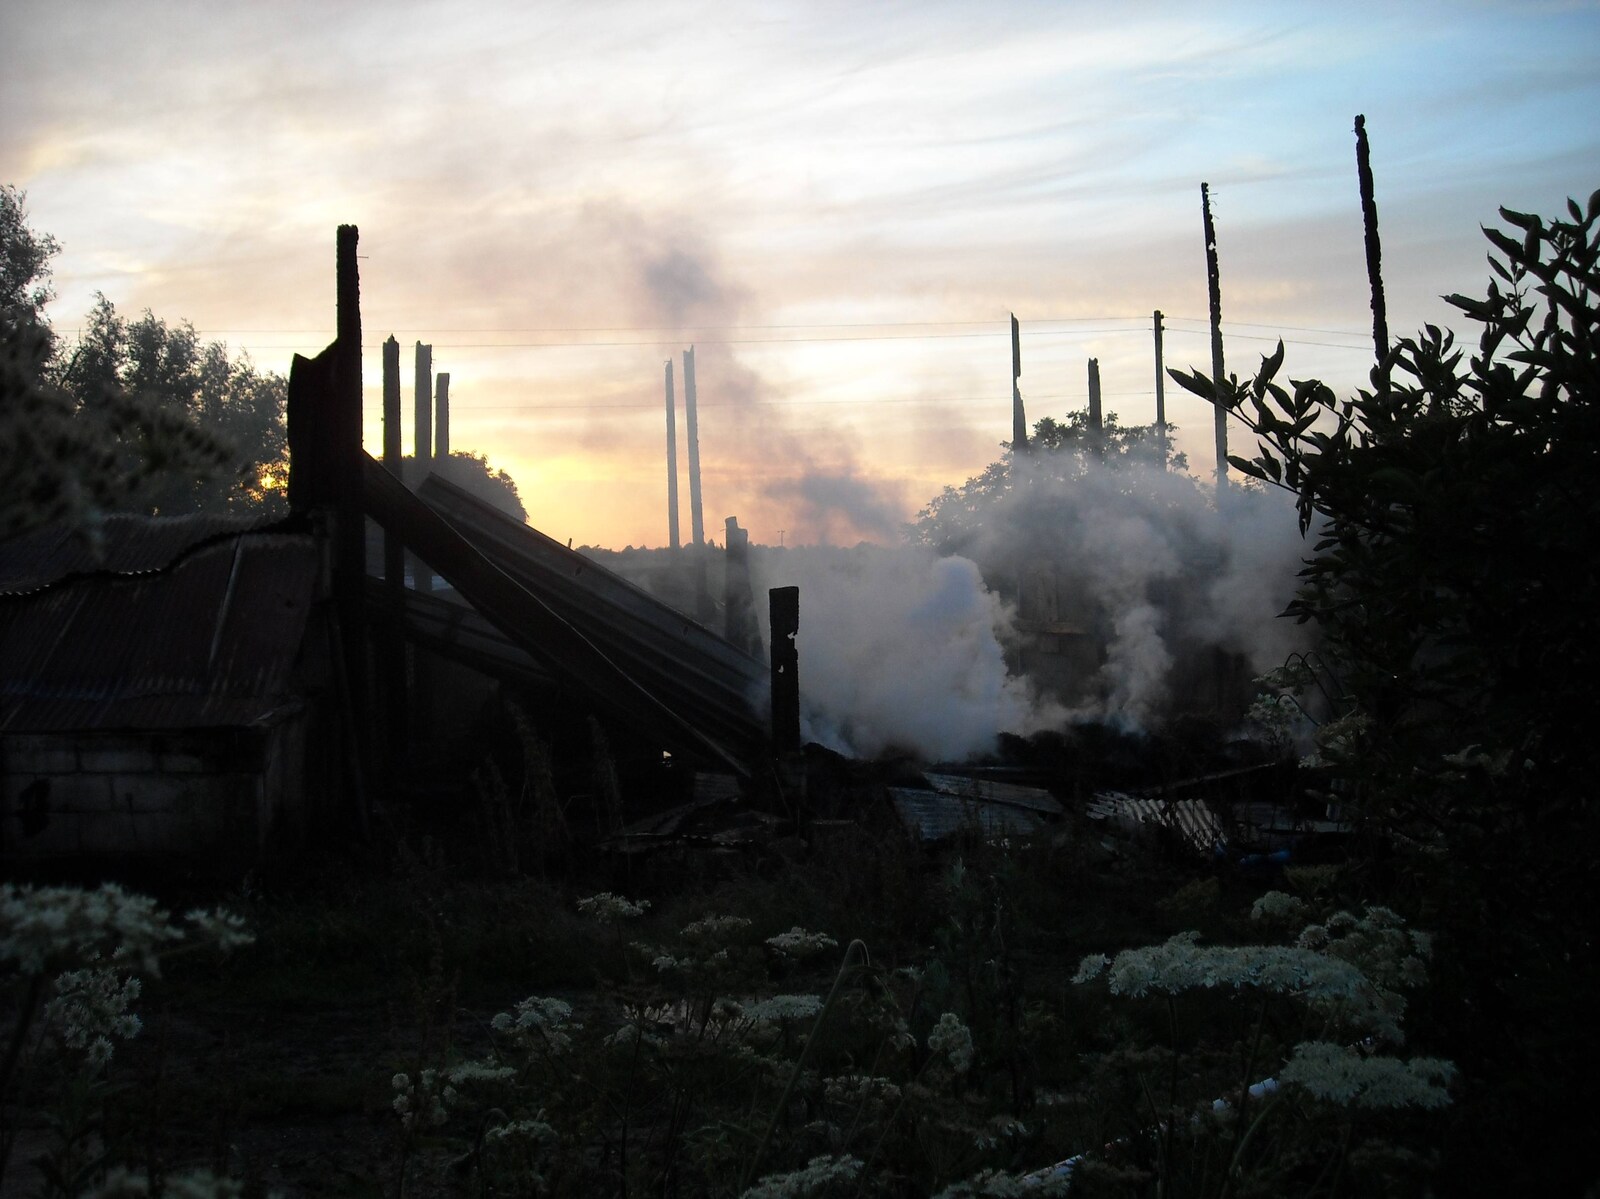 Steam and smoke drift away into the sunset from A Fire at Valley Farm, Thrandeston, Suffolk - 24th June 2009